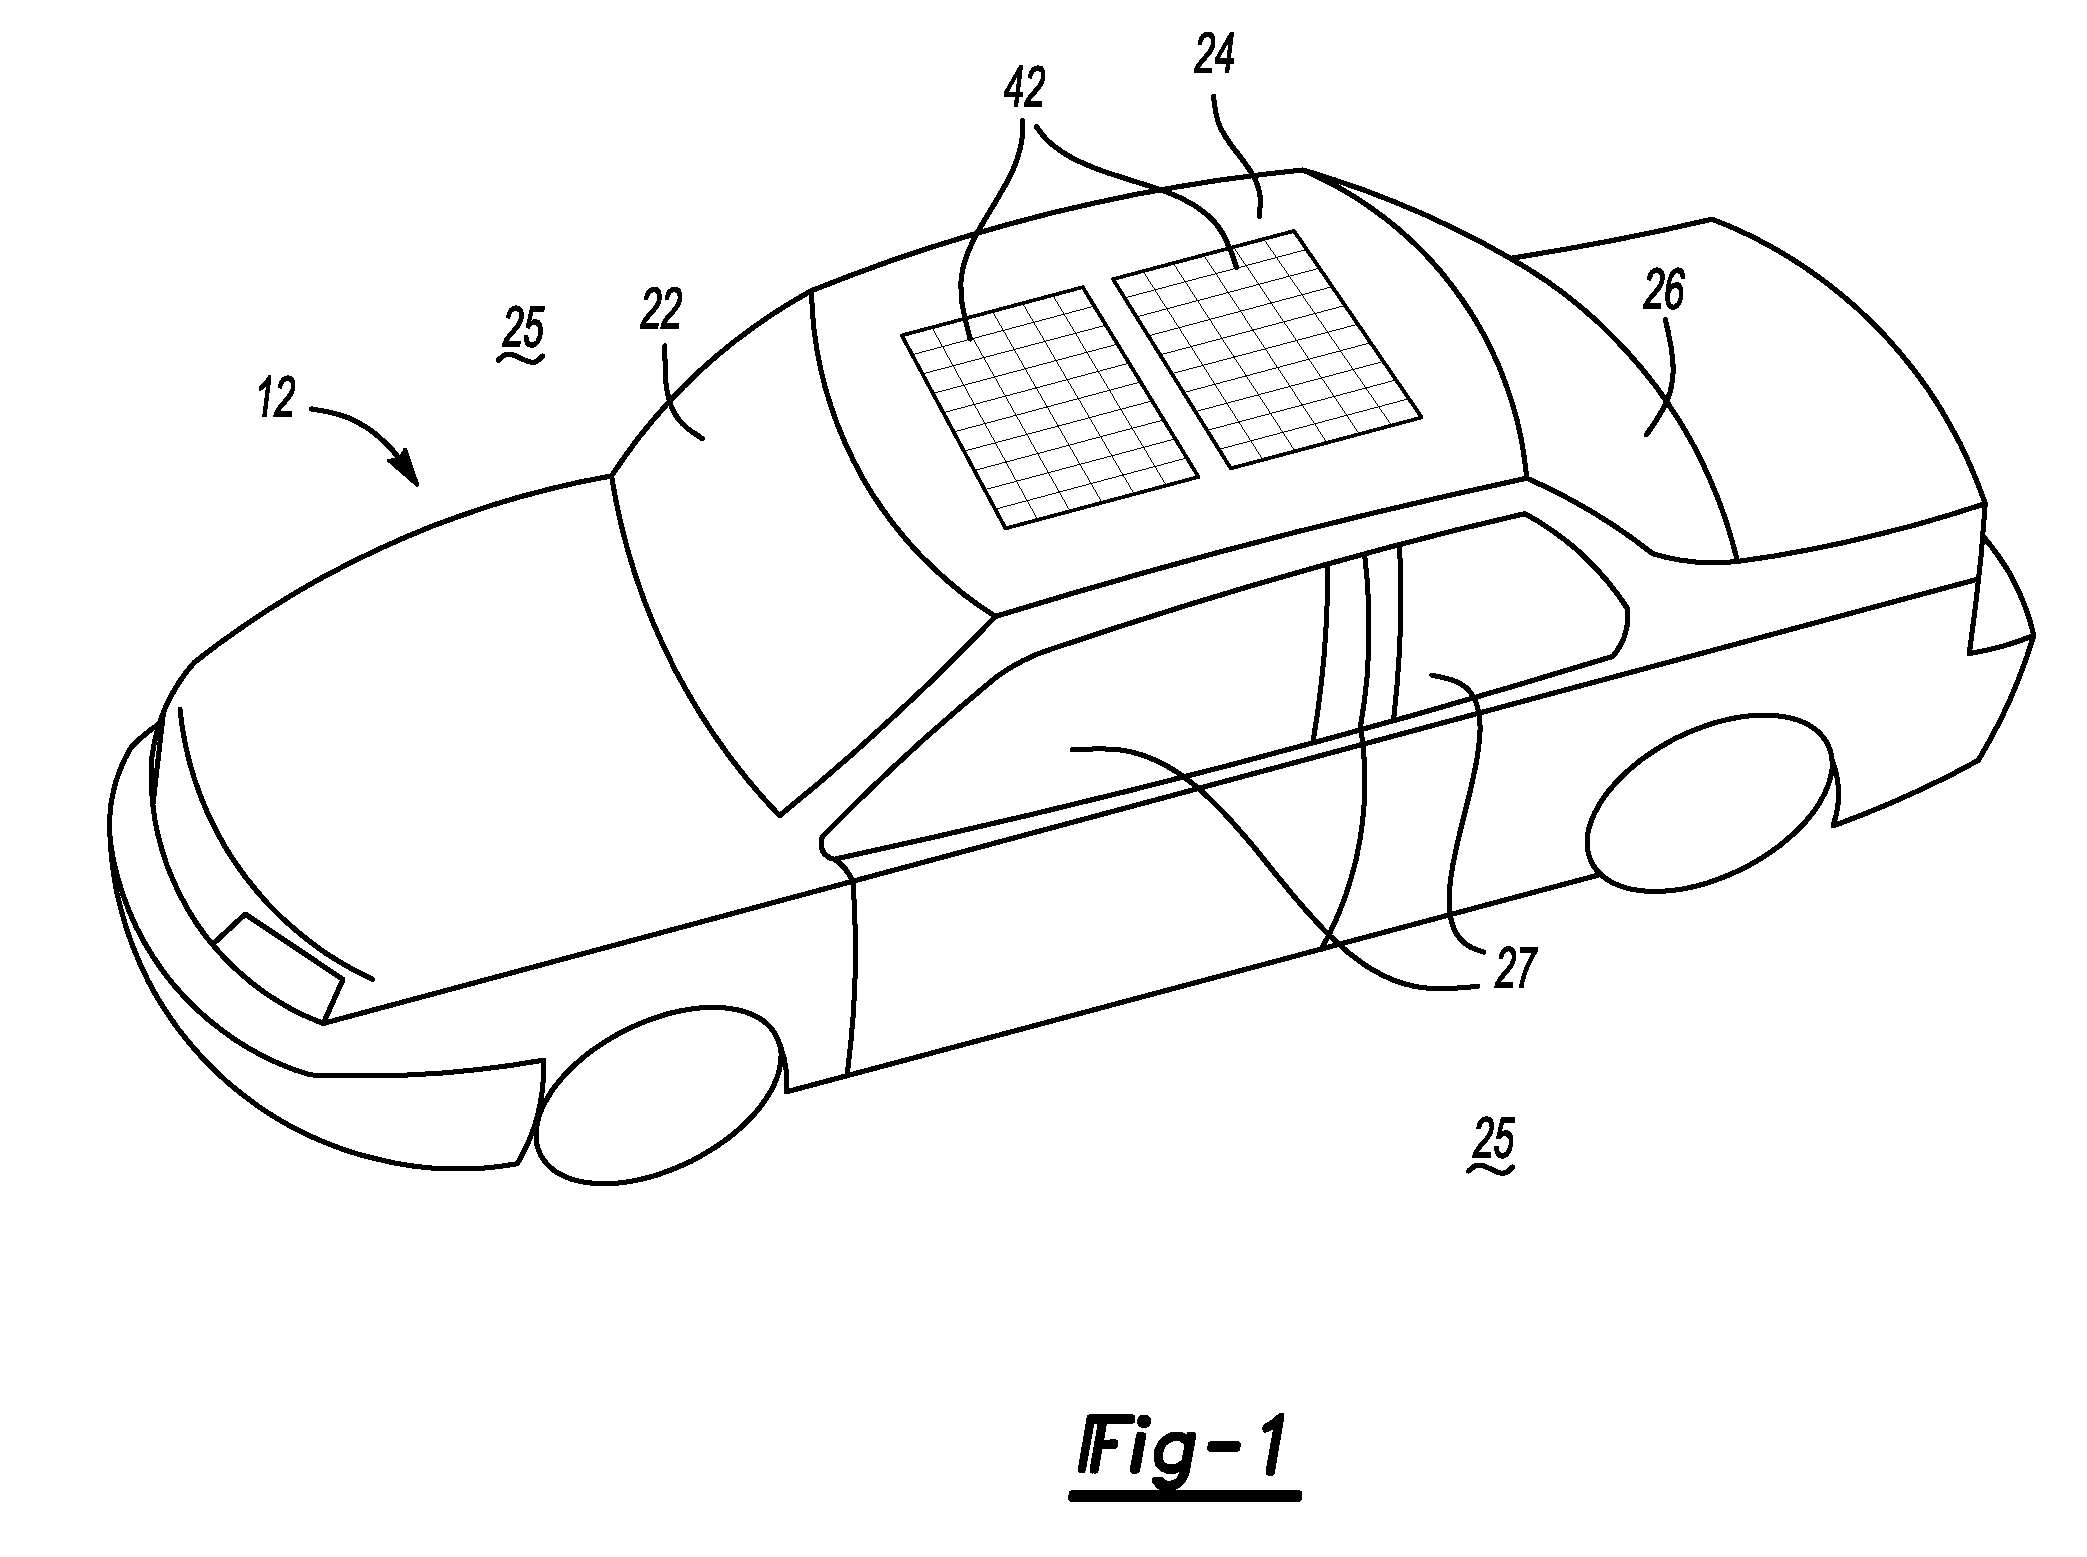 System and Method to Reduce Thermal Energy in Vehicle Interiors Subjected to Solar Radiation